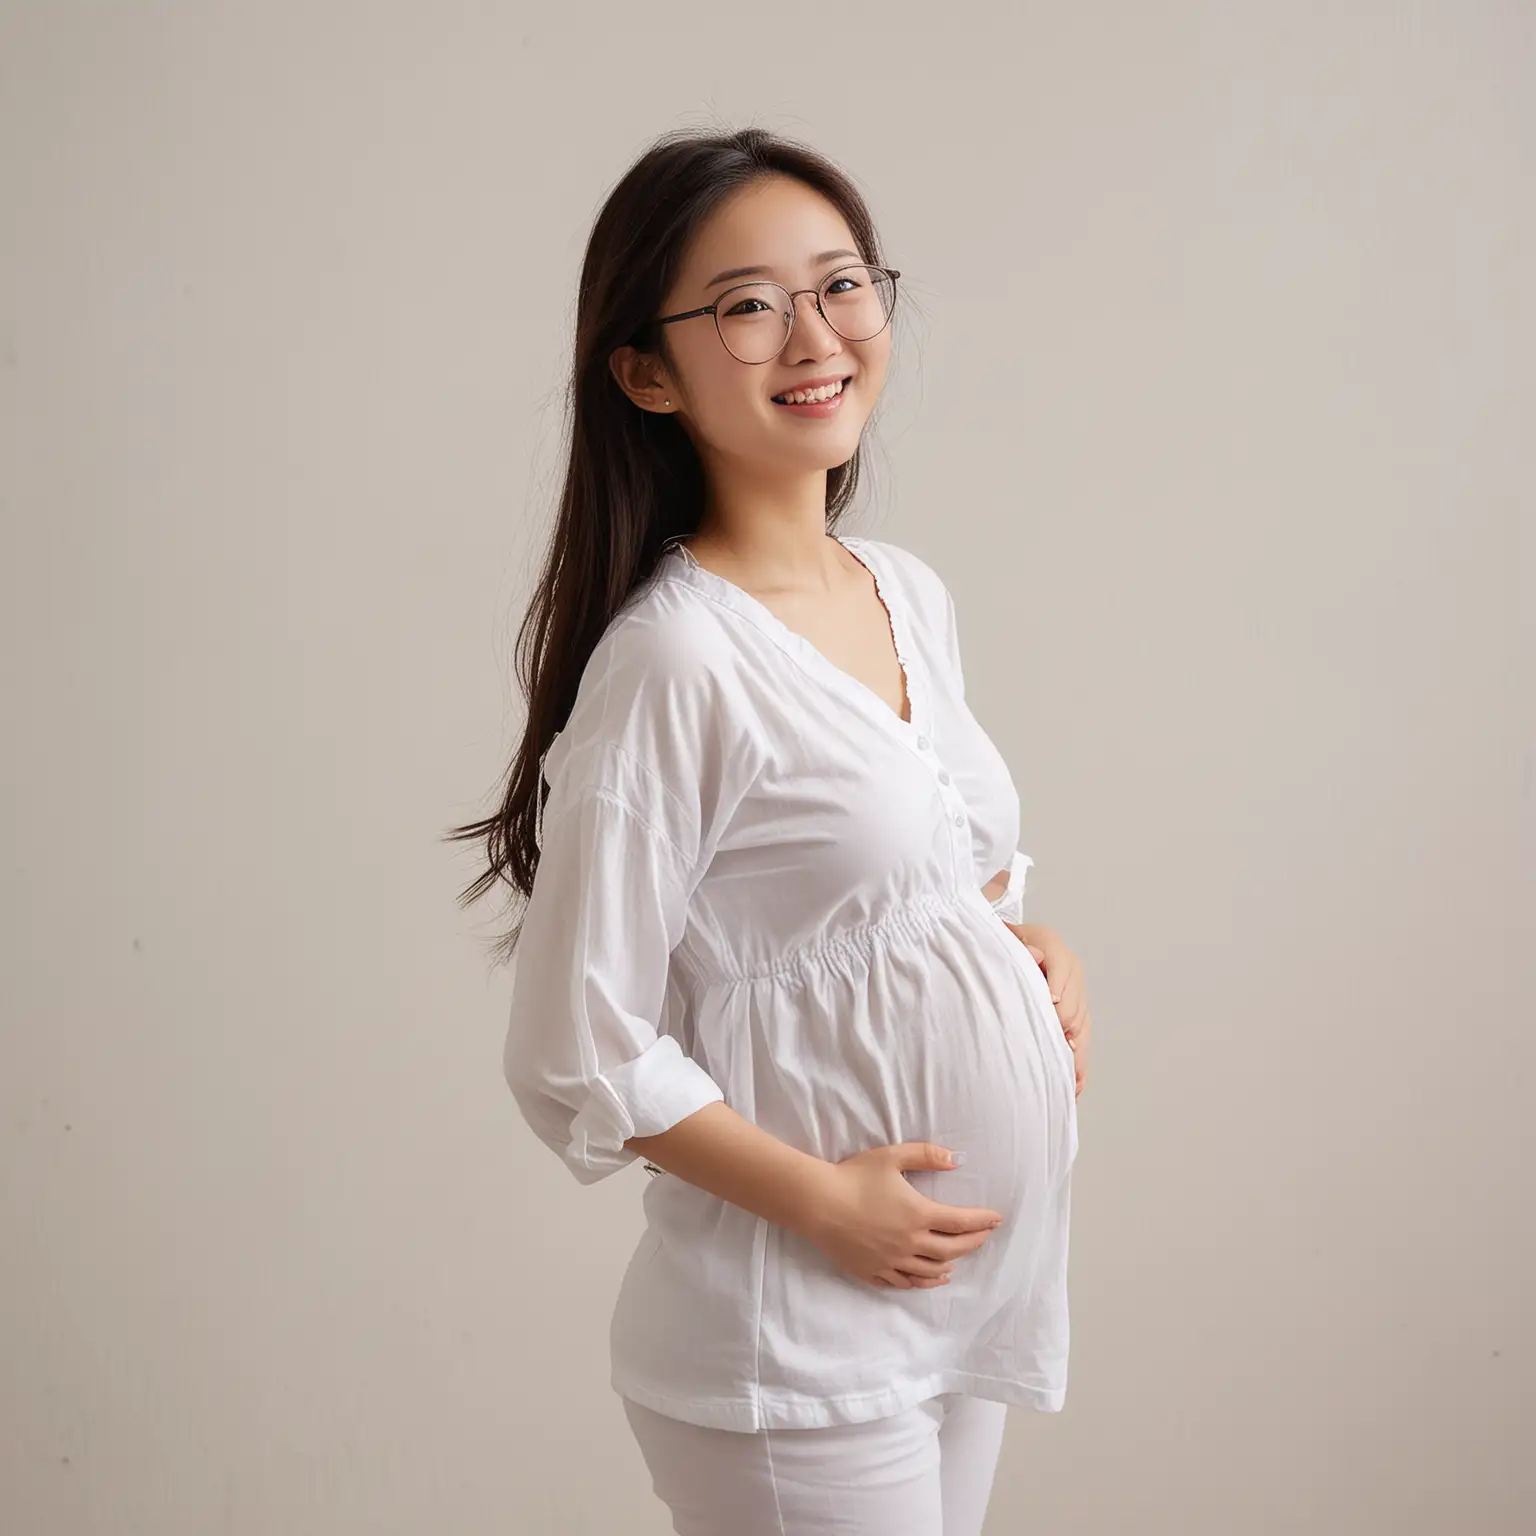 Chinese-Pregnant-Woman-in-White-Attire-with-Glasses-and-Sunny-Smile